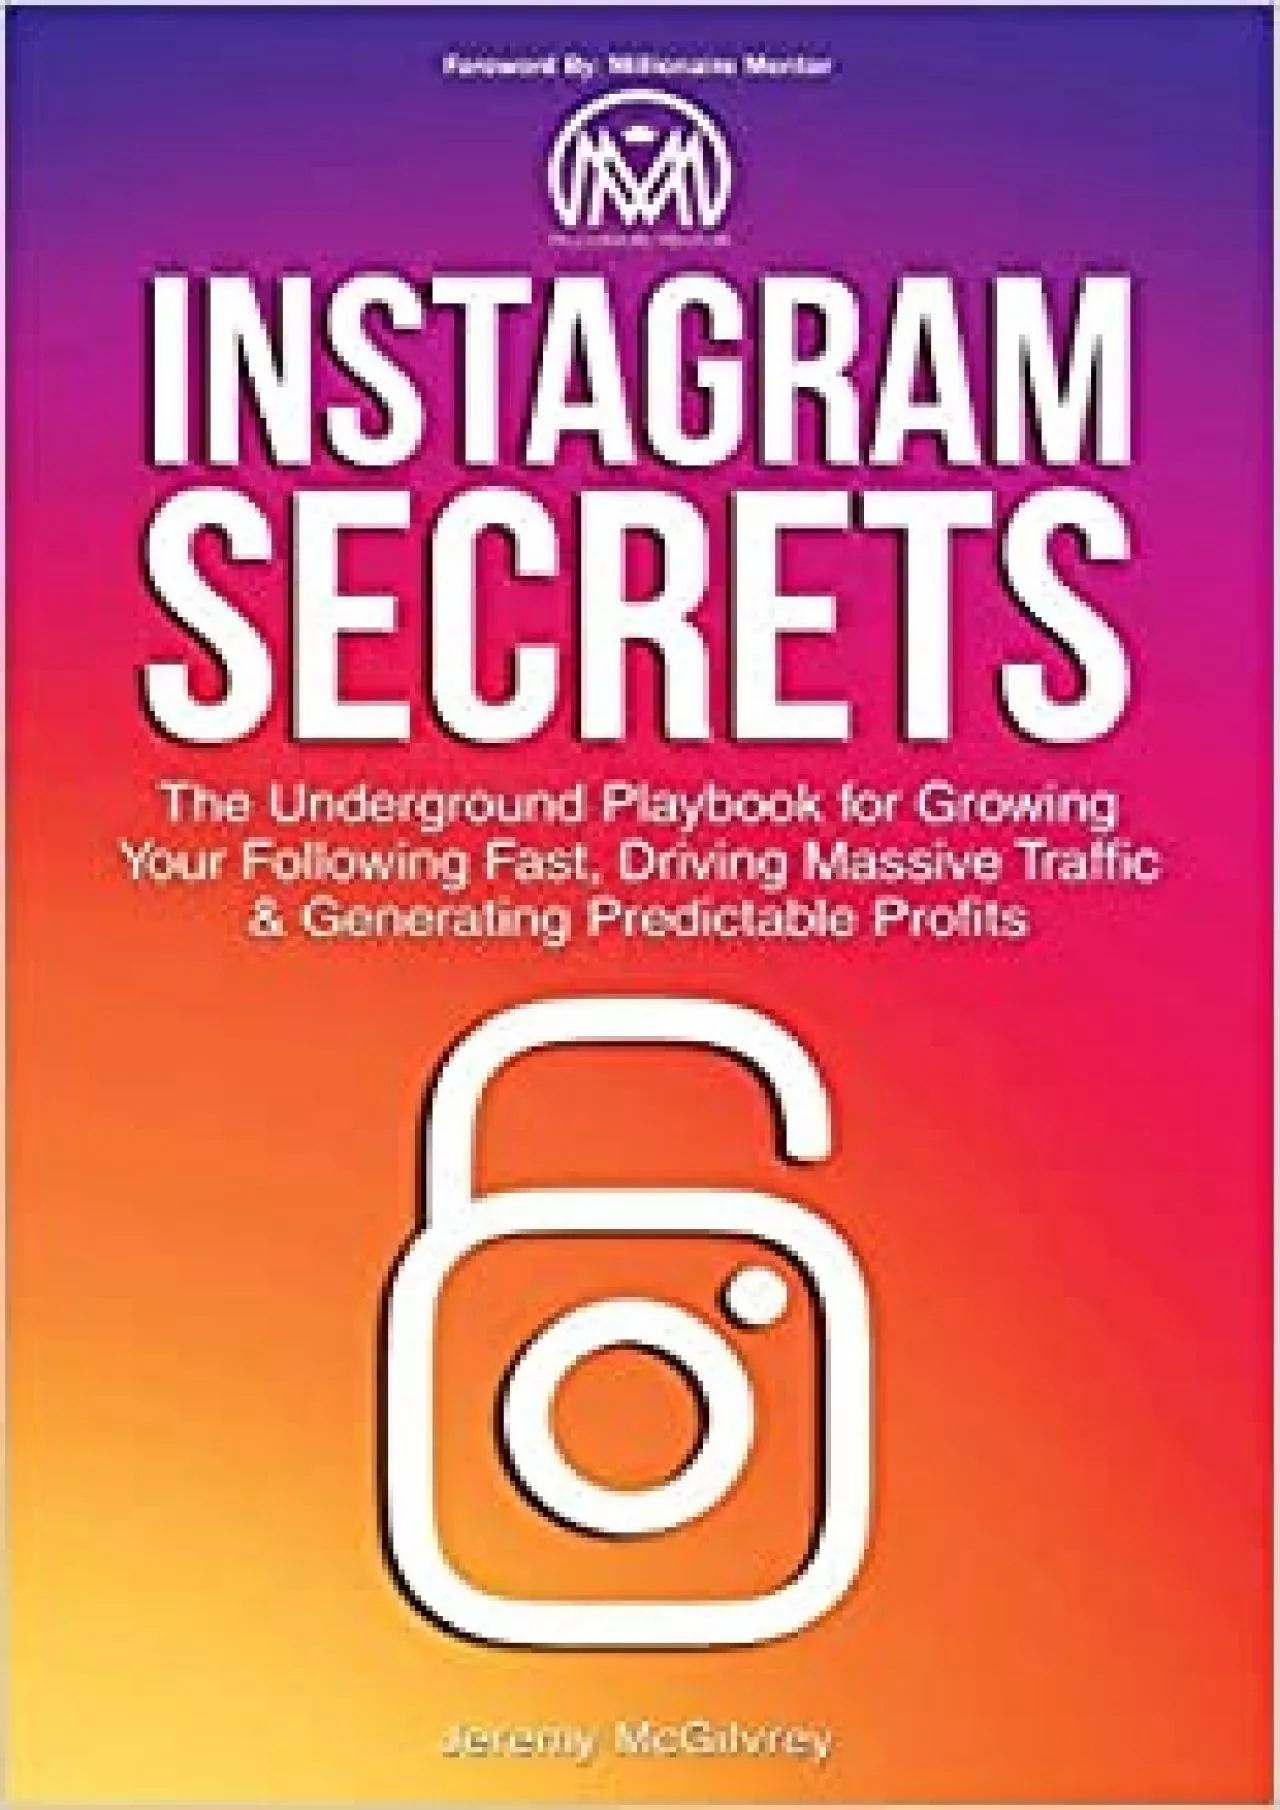 Instagram Secrets The Underground Playbook for Growing Your Following Fast, Driving Massive